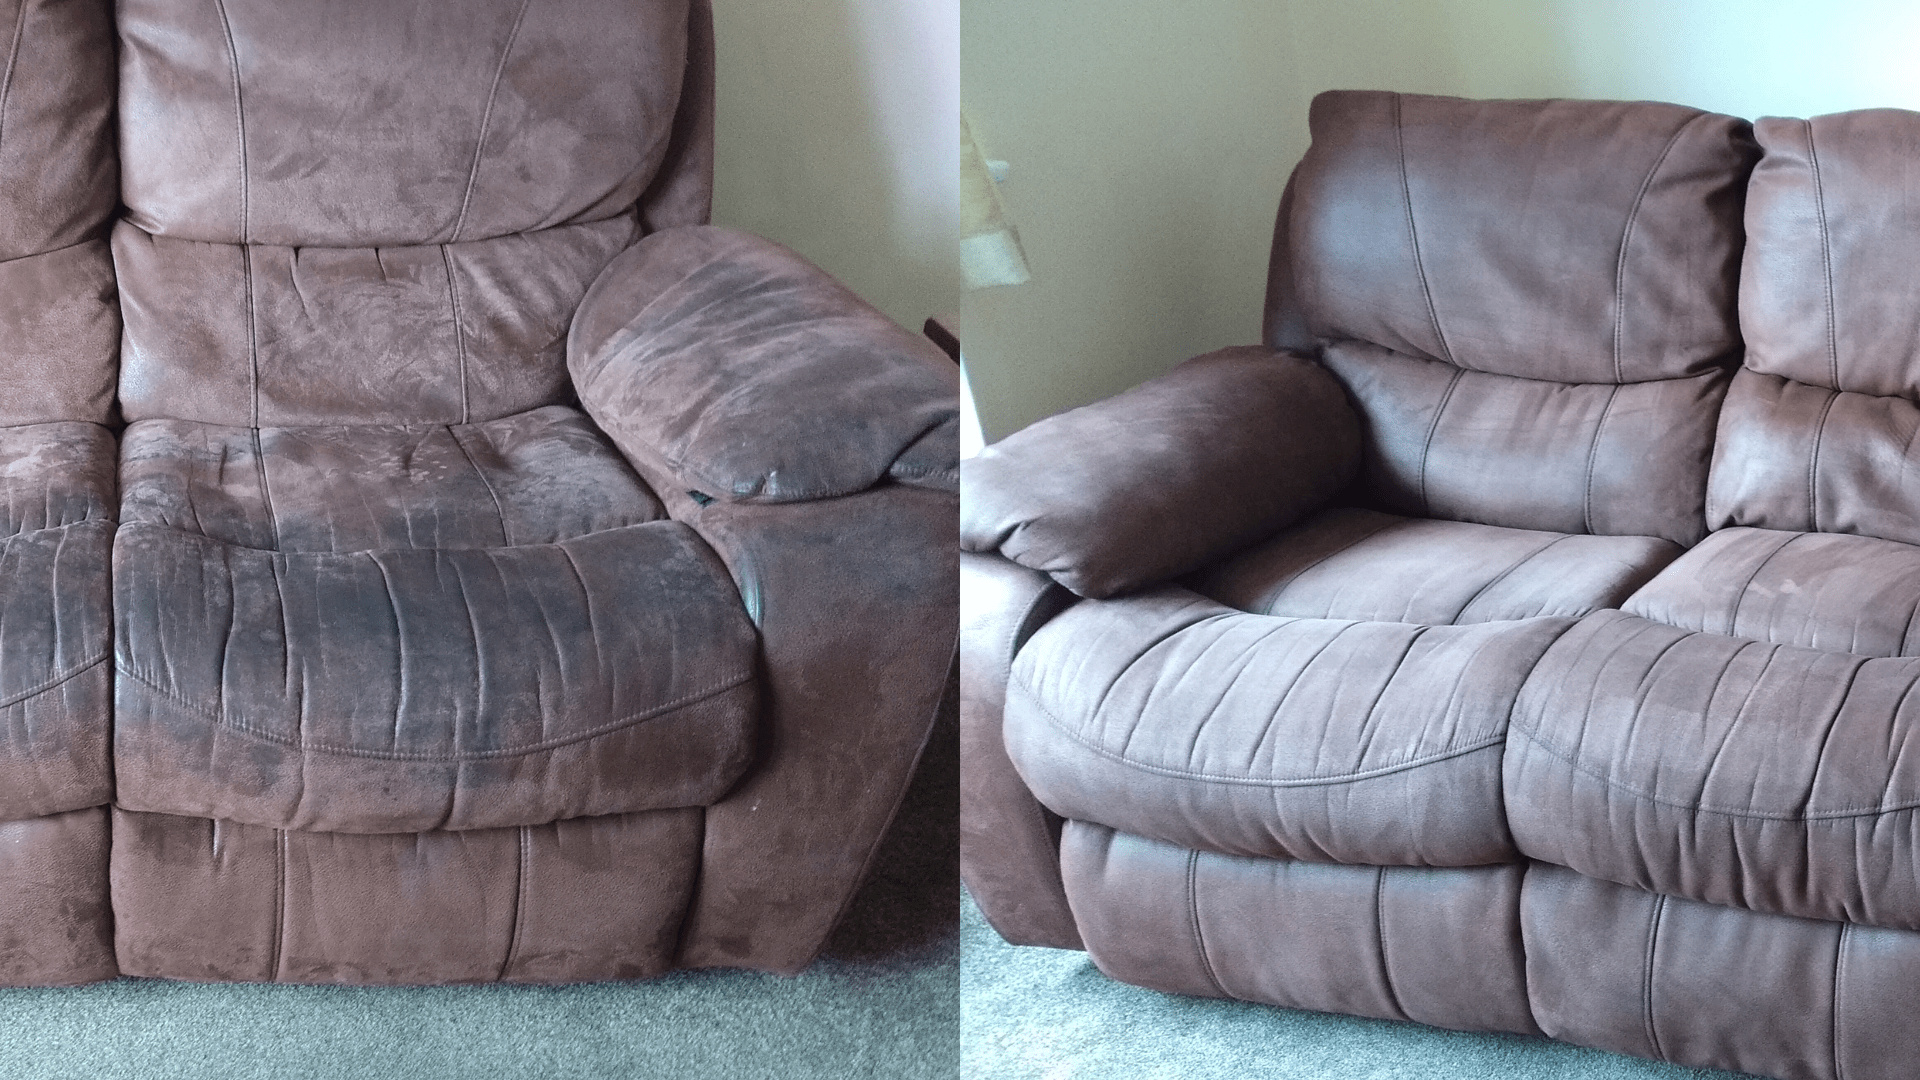 Upholstery cleaning before and after